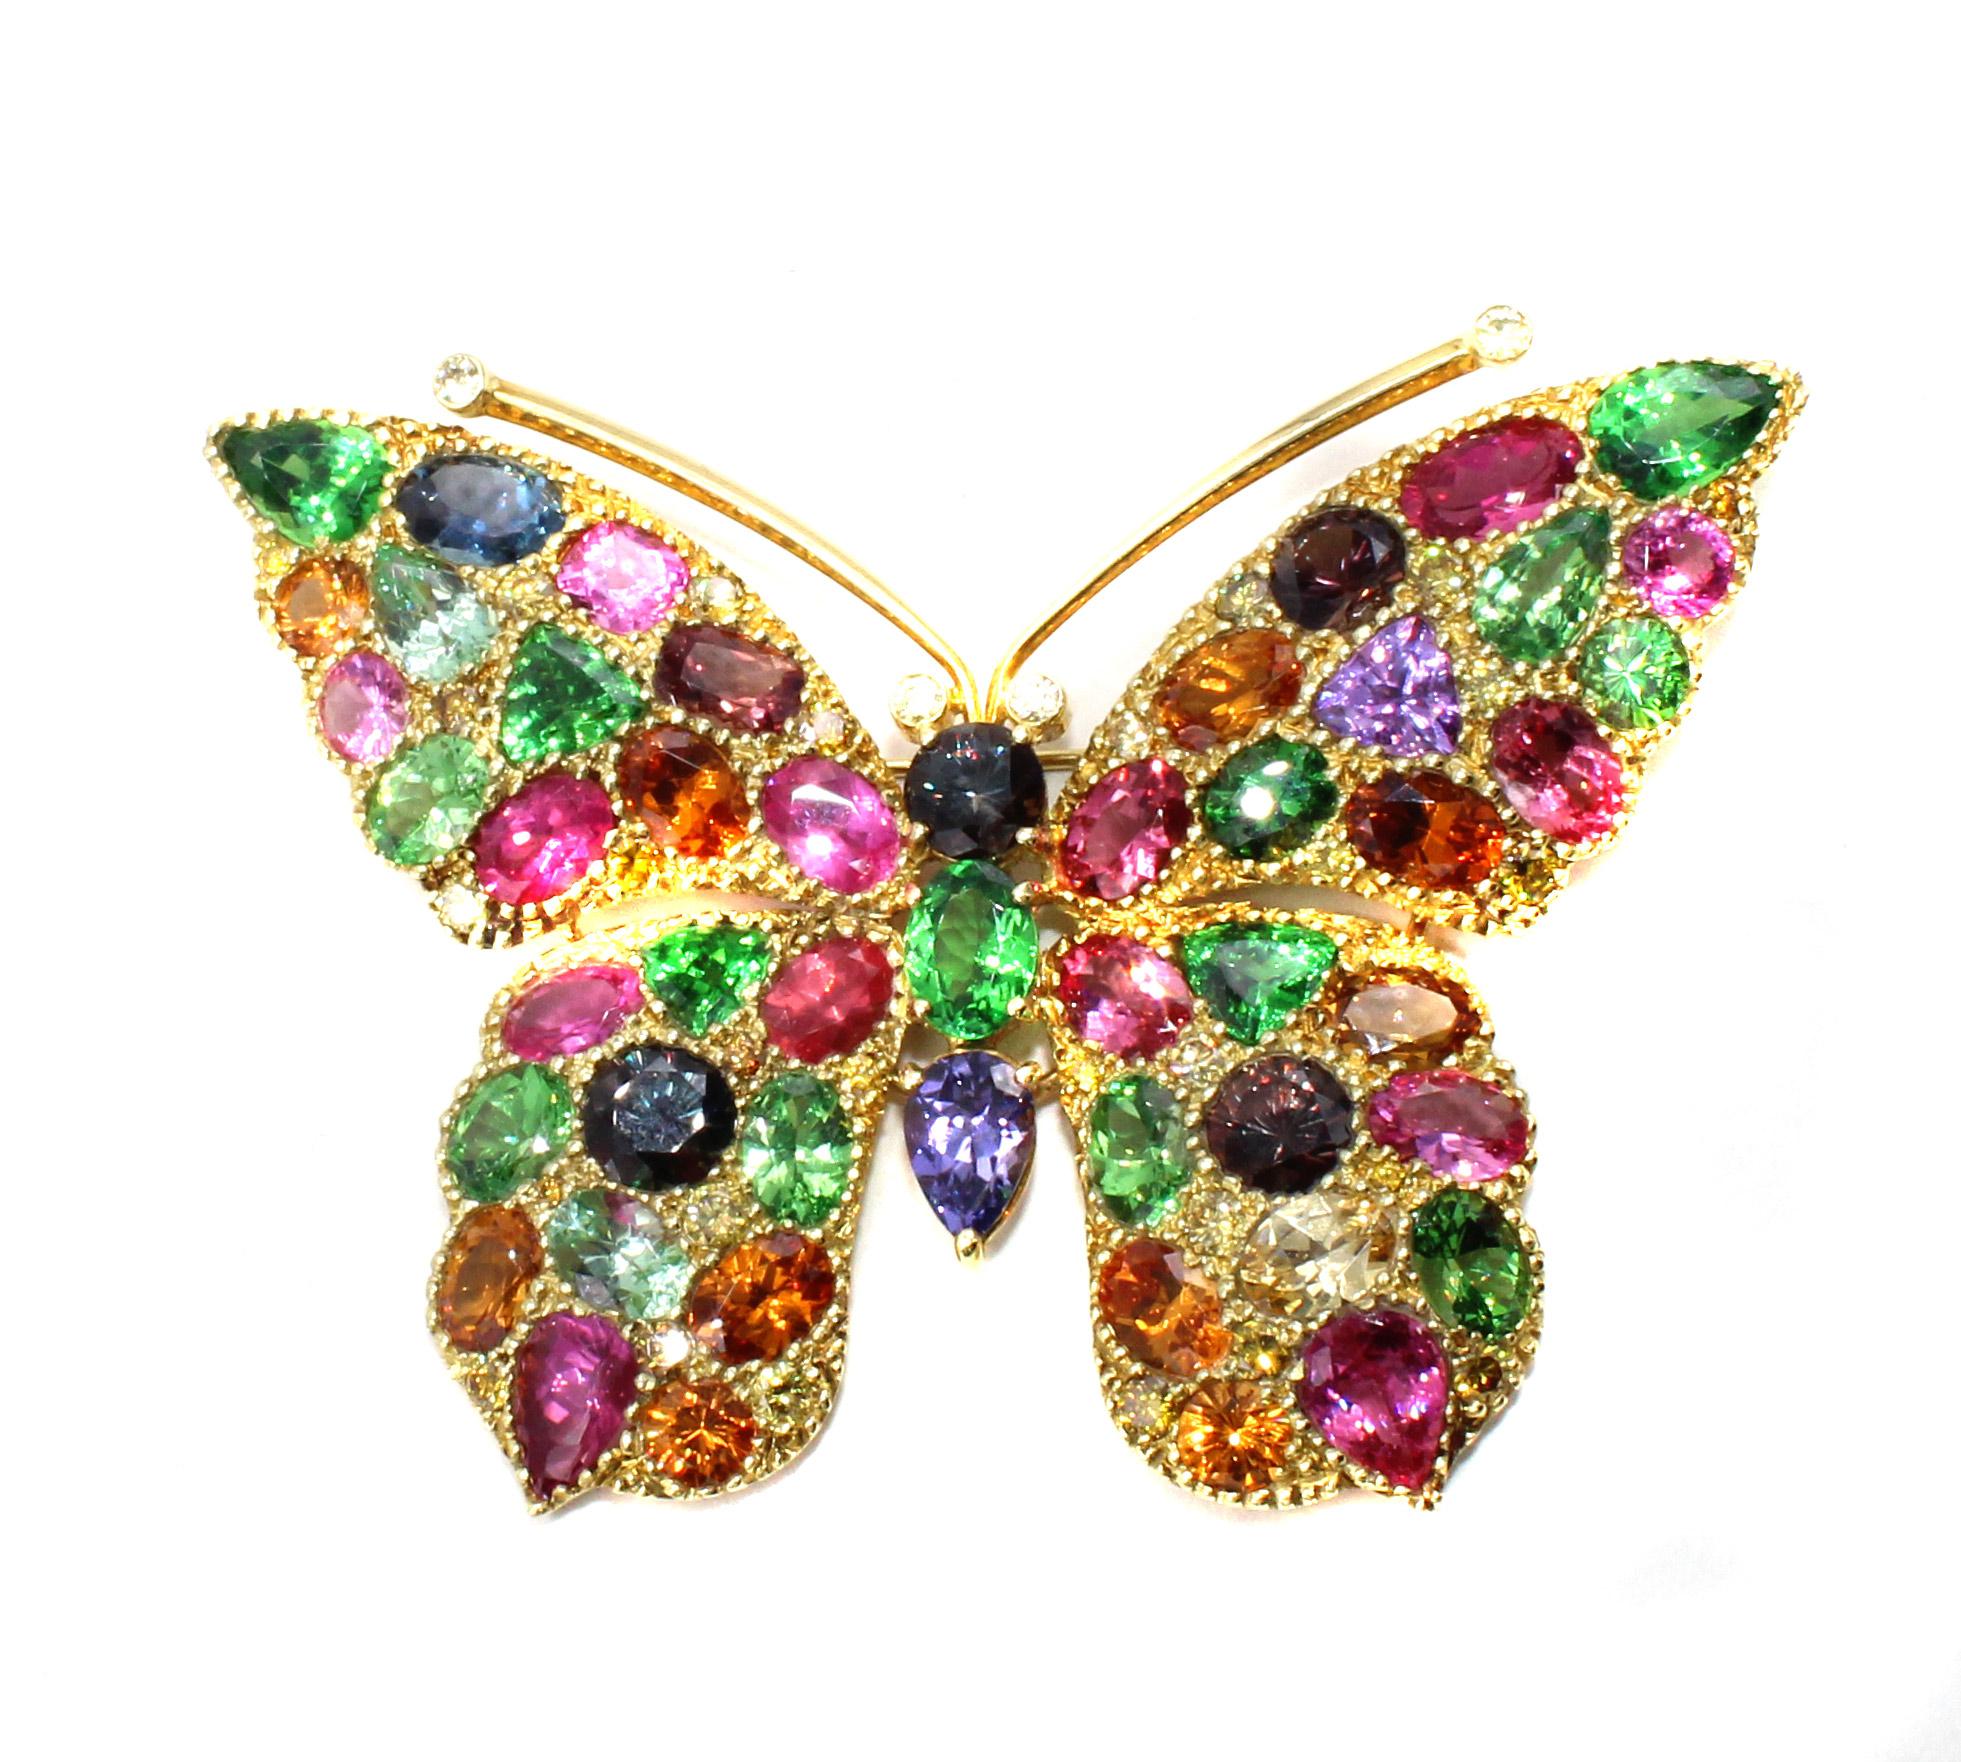 This impressive and unique butterfly brooch has been masterfully handcrafted and designed with over 52 carats of natural gemstones and 1.60 carats of natural yellow and white diamonds. From vivid green Tsavorites, intense orange Mandarin Garnets,